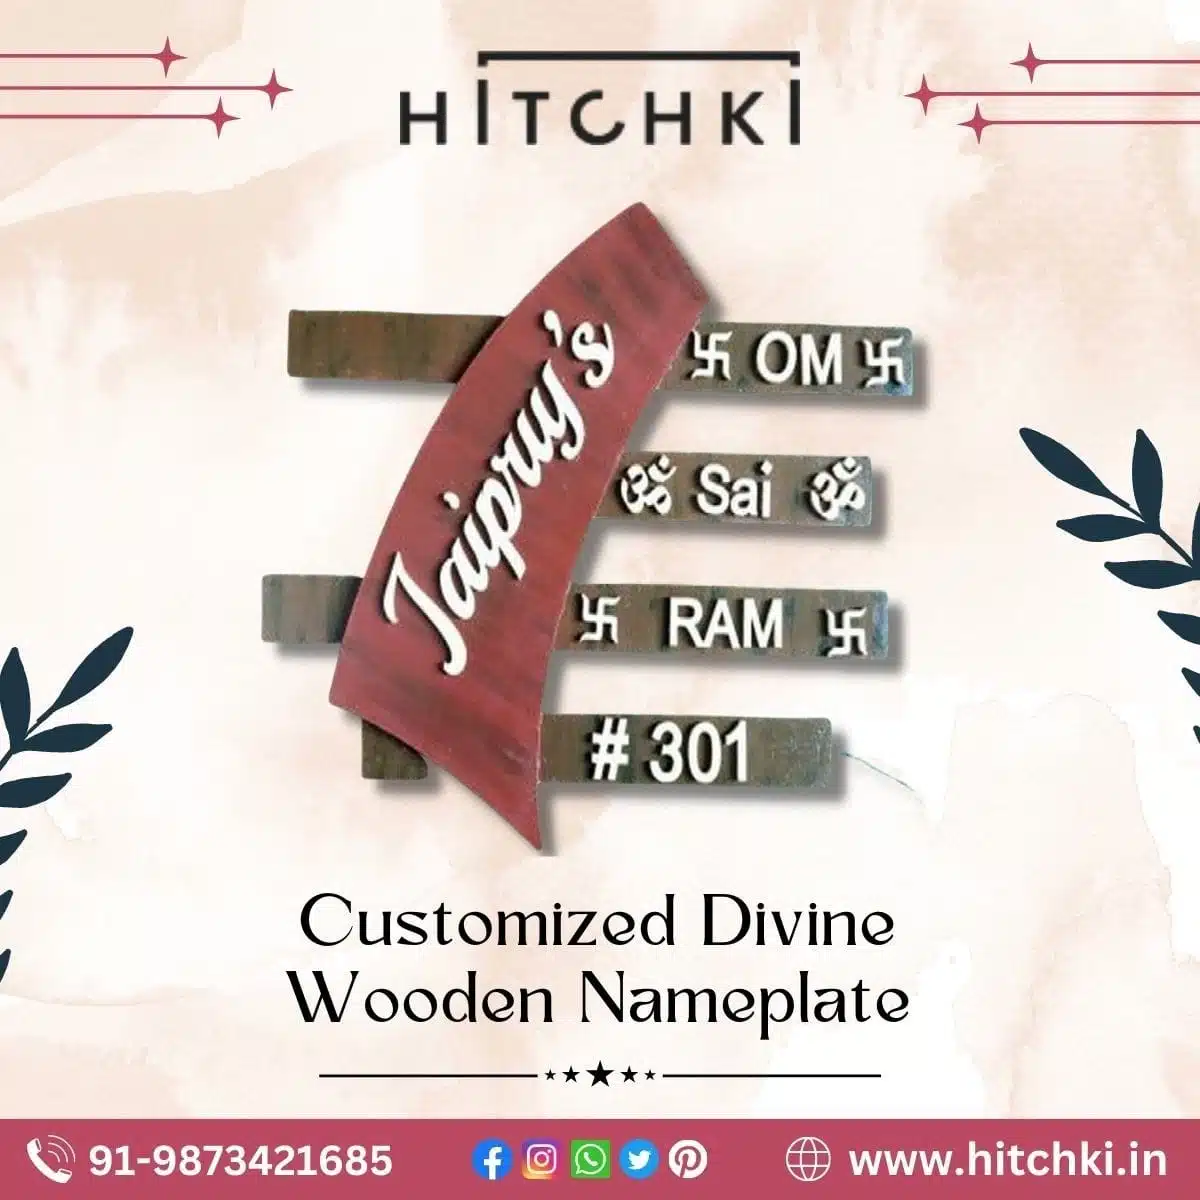 Selling Customized Divine Wooden Nameplates Online